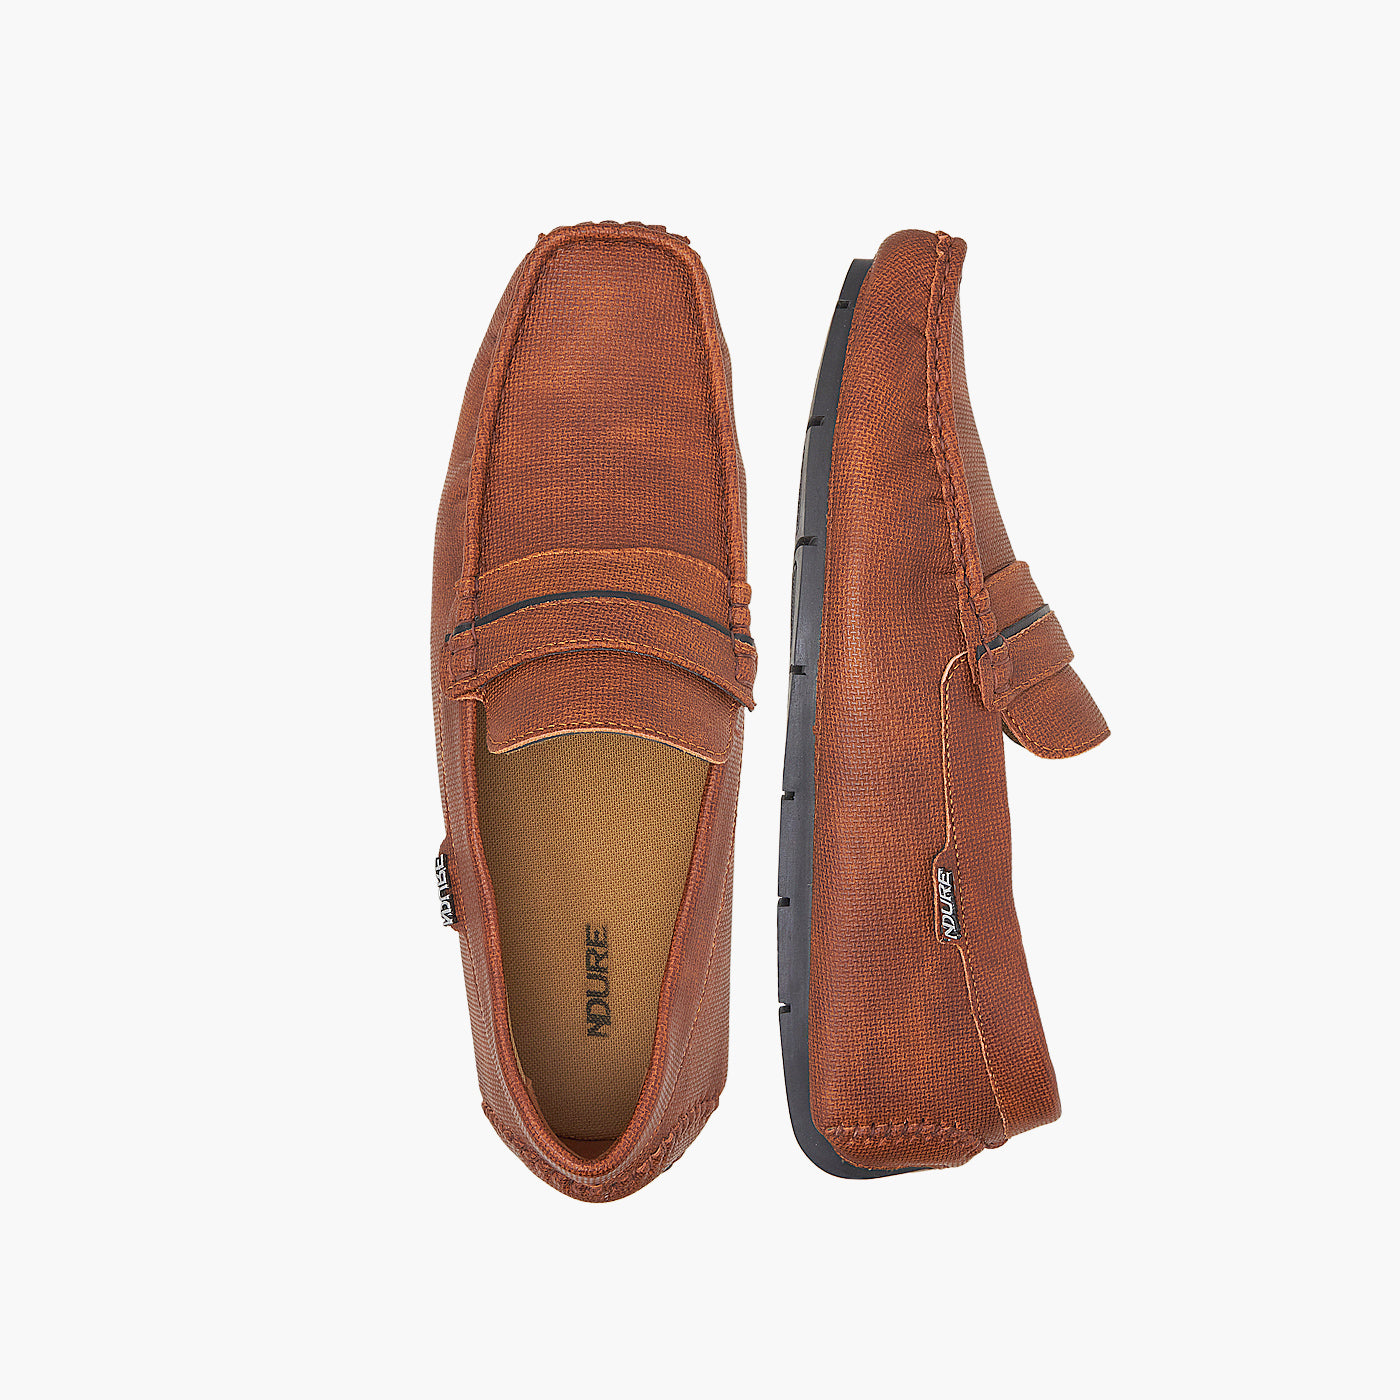 Men's Comfortable Loafers